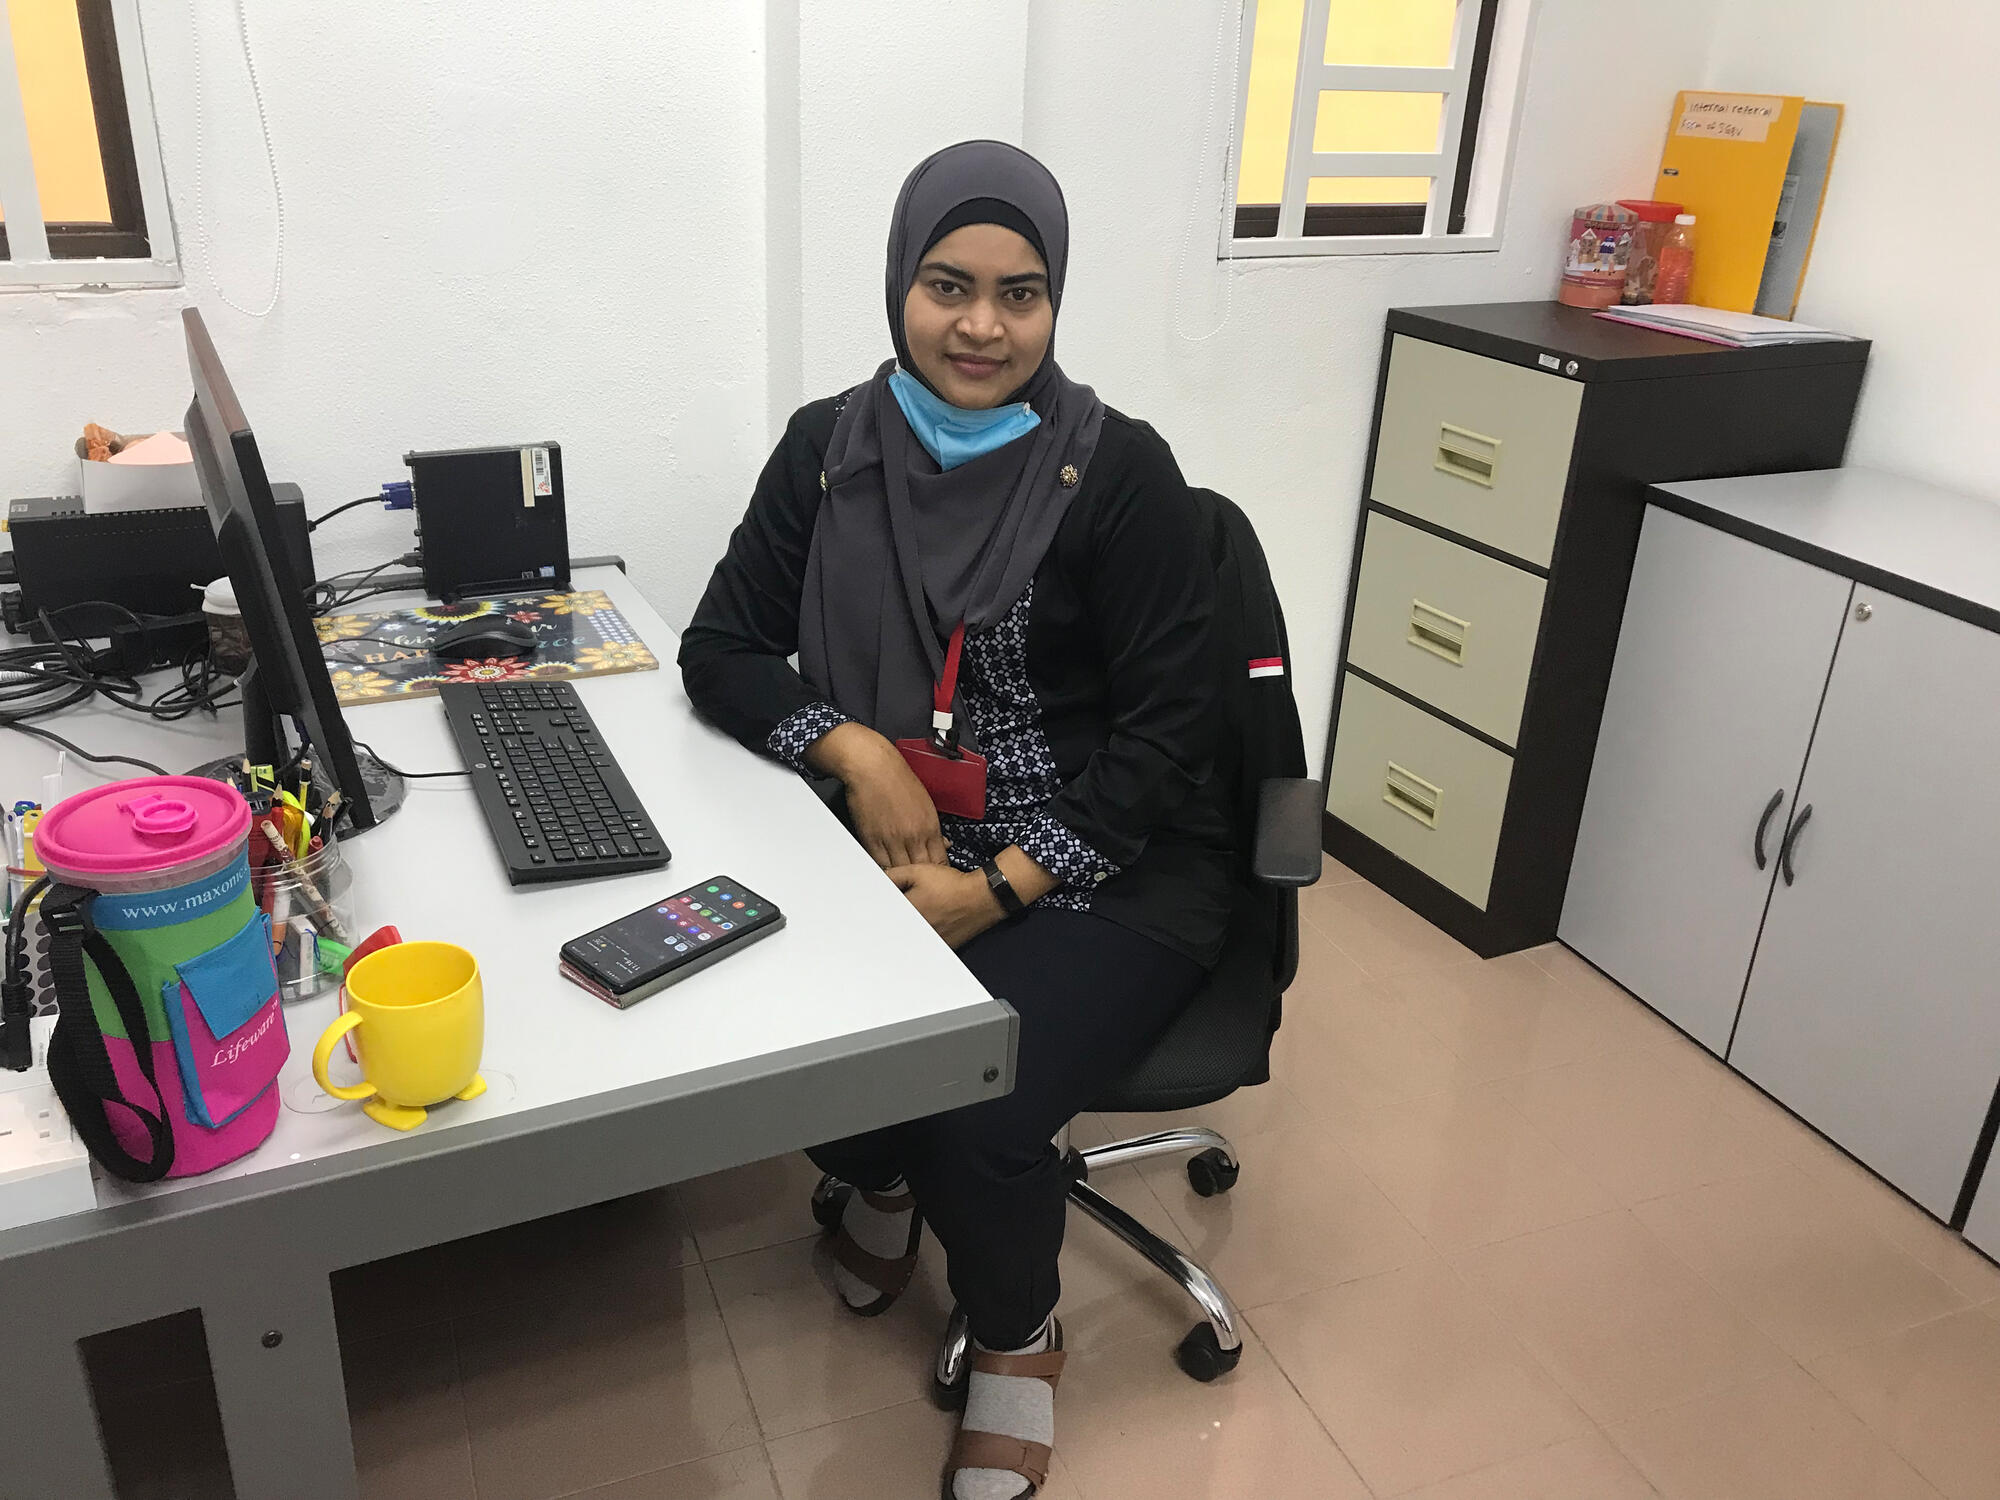 Nur Bar Binti Islam is a Rohingya woman who arrived in Malaysia from Myanmar at the age of six. She faced many challenges related to her safety and protection, and never had access to formal education. Today, she volunteers with MSF.